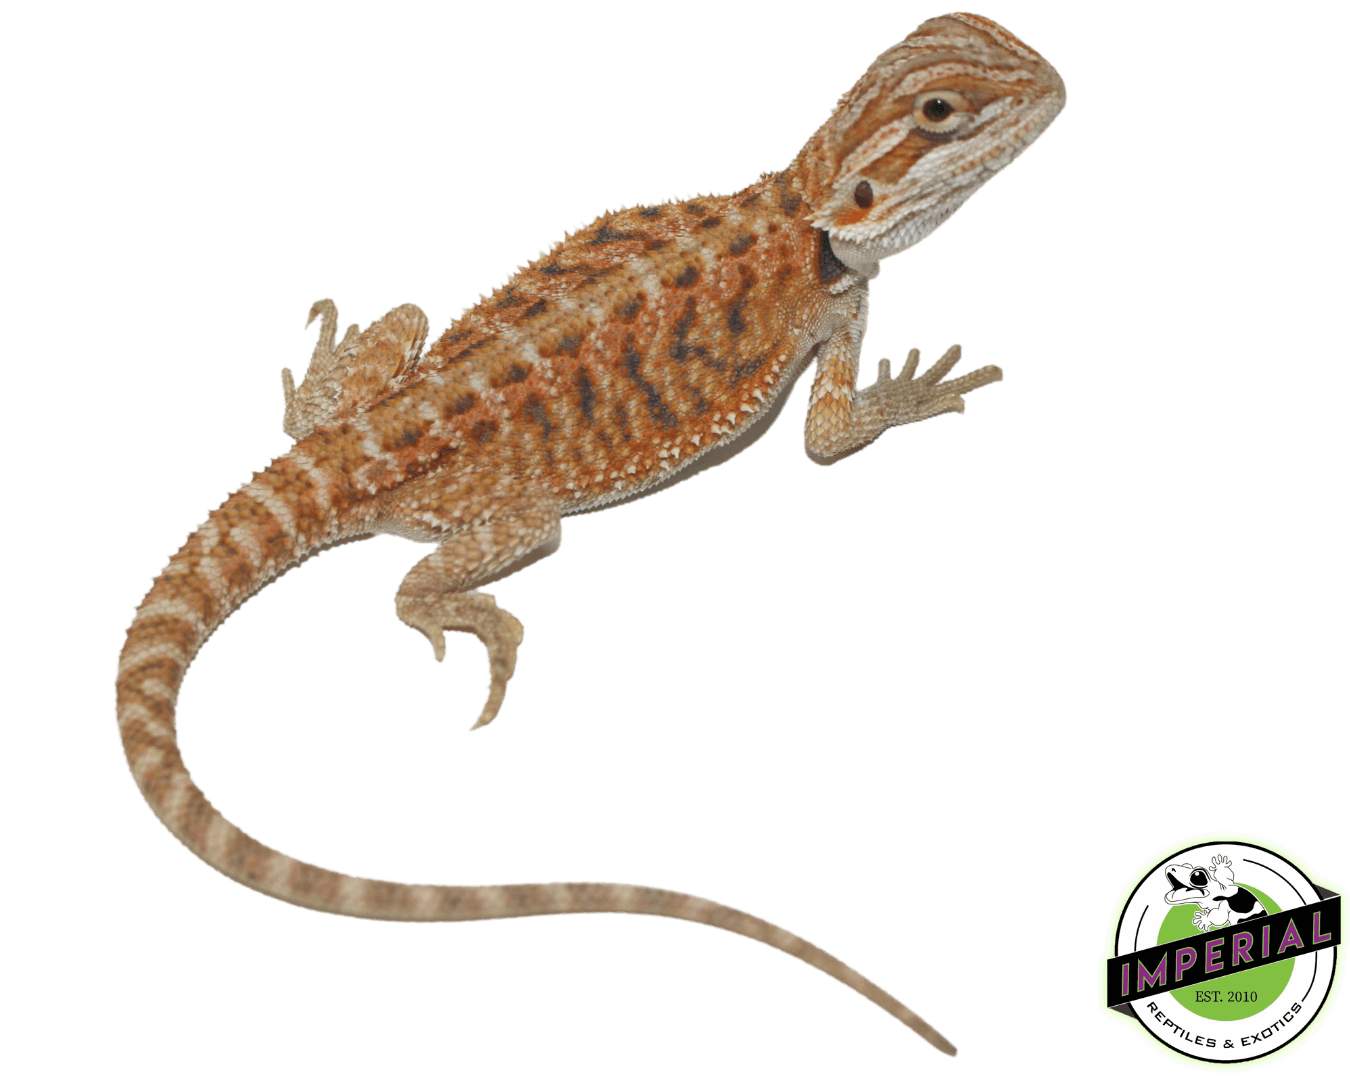 red hypo bearded dragon for sale, buy reptiles online